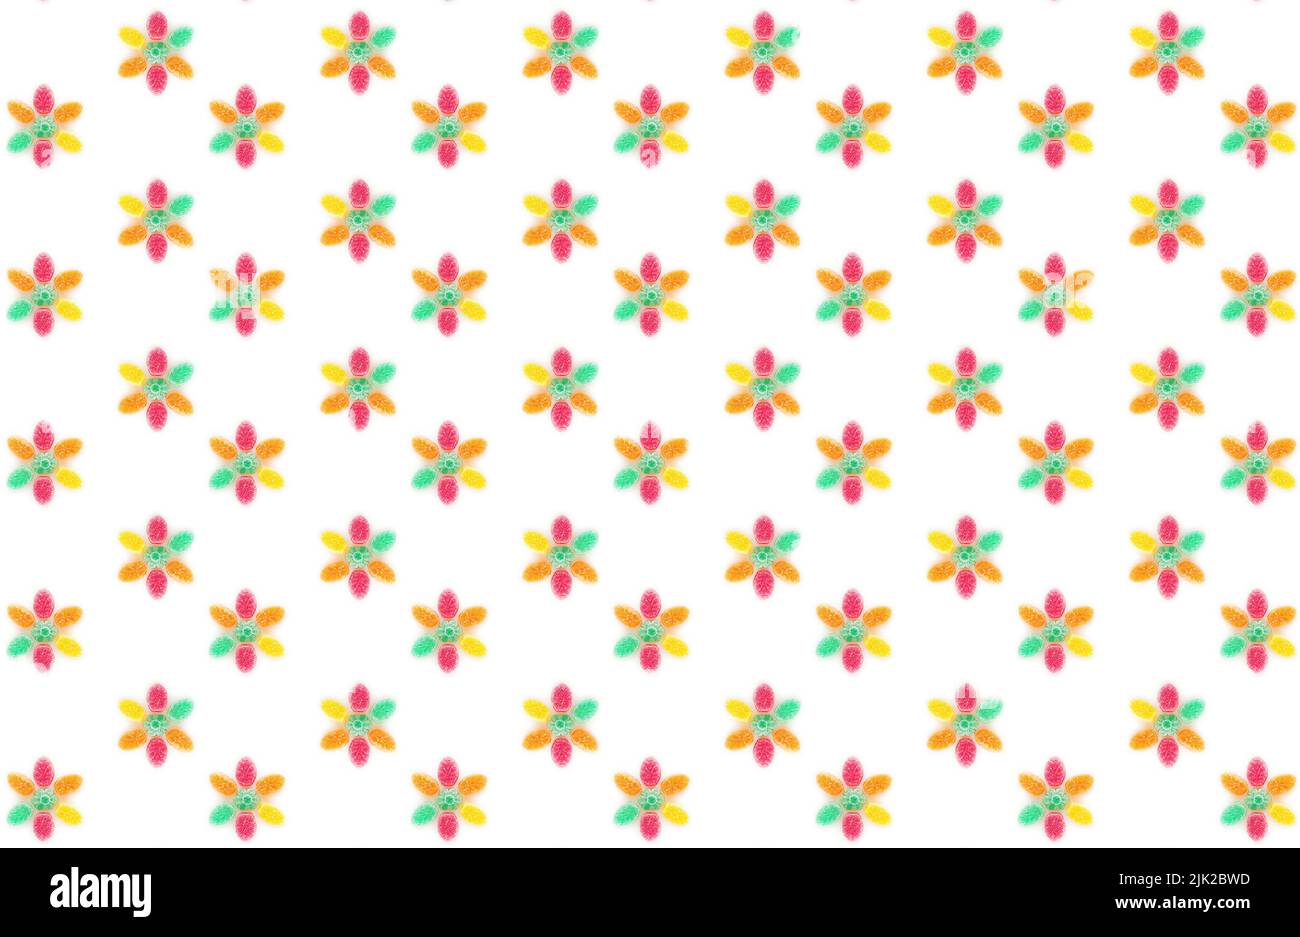 floral pattern with the pastel tones fruit jelly Stock Photo